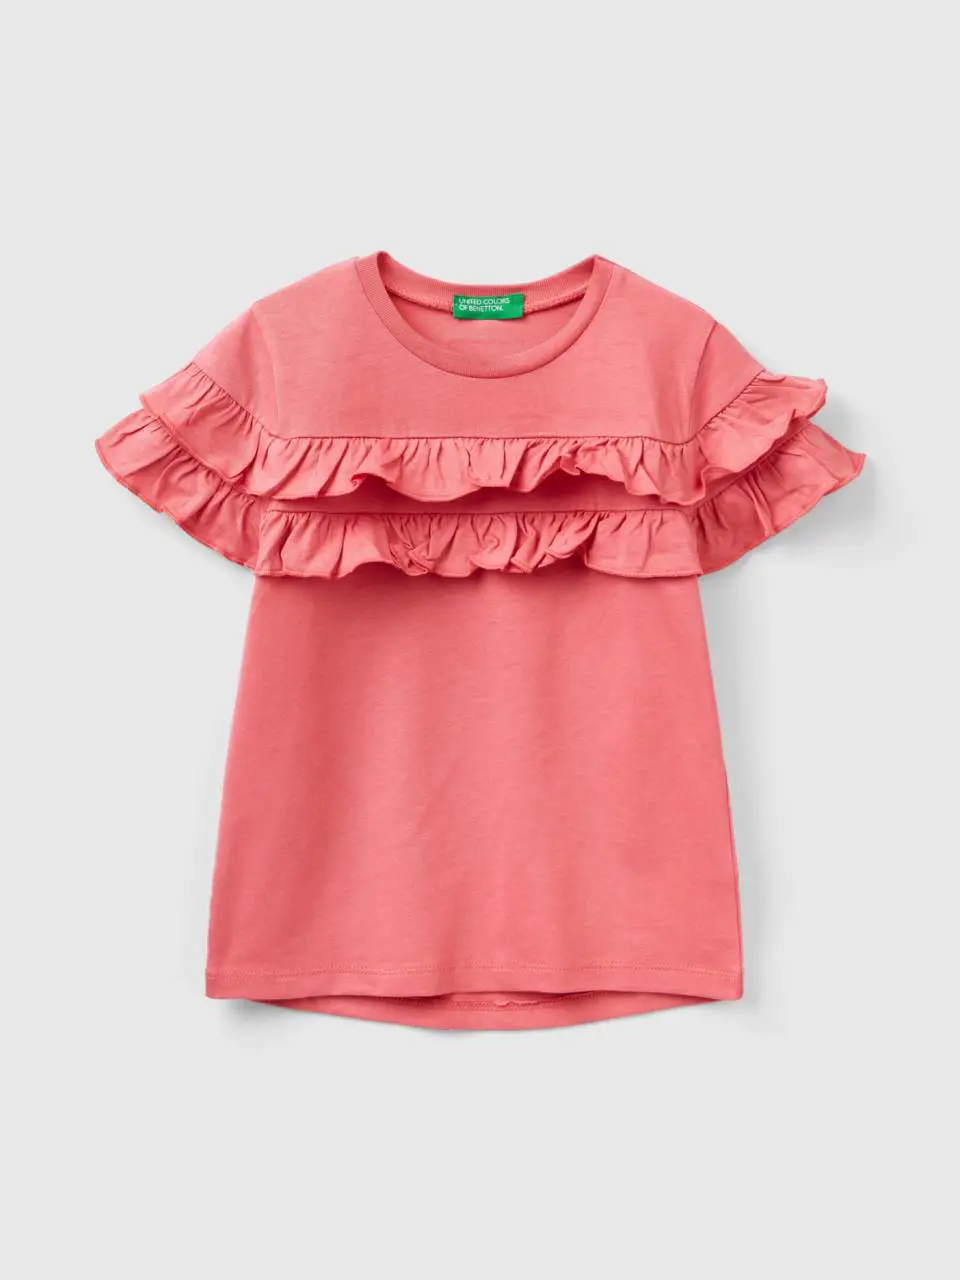 Benetton t-shirt with rouches. 1